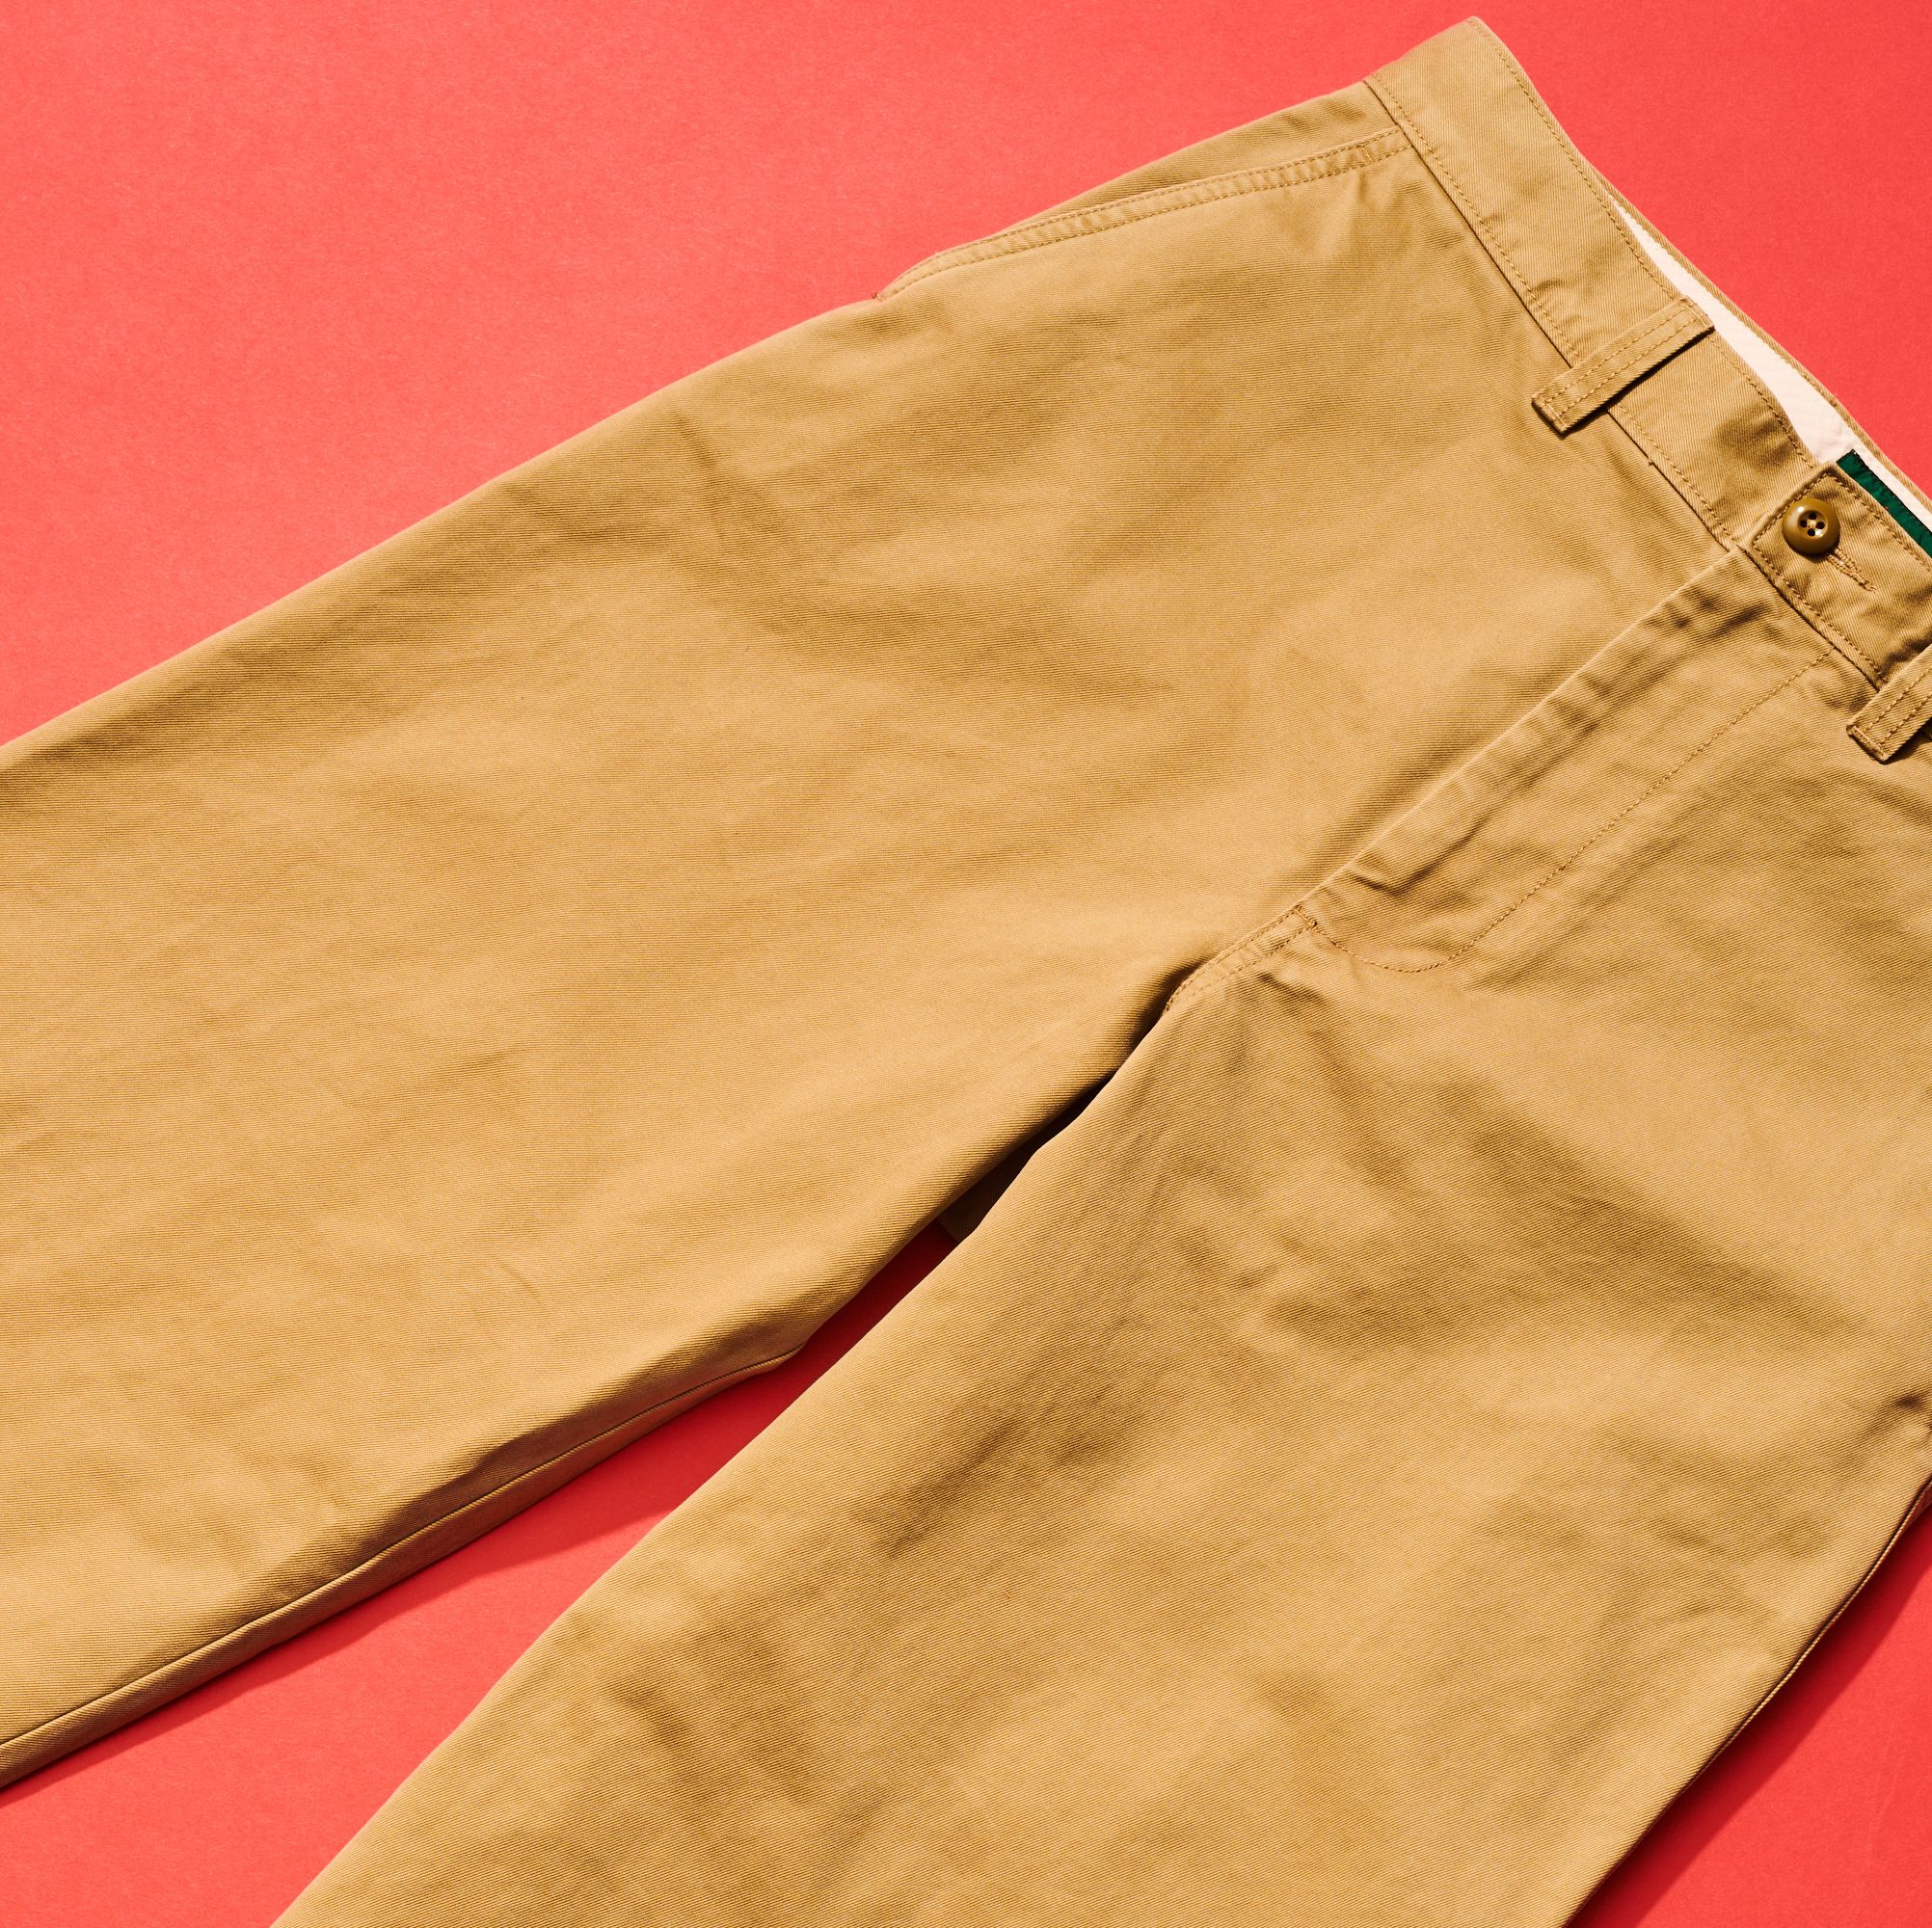 J.Crew's Giant Fit Chinos Deserve the Hype